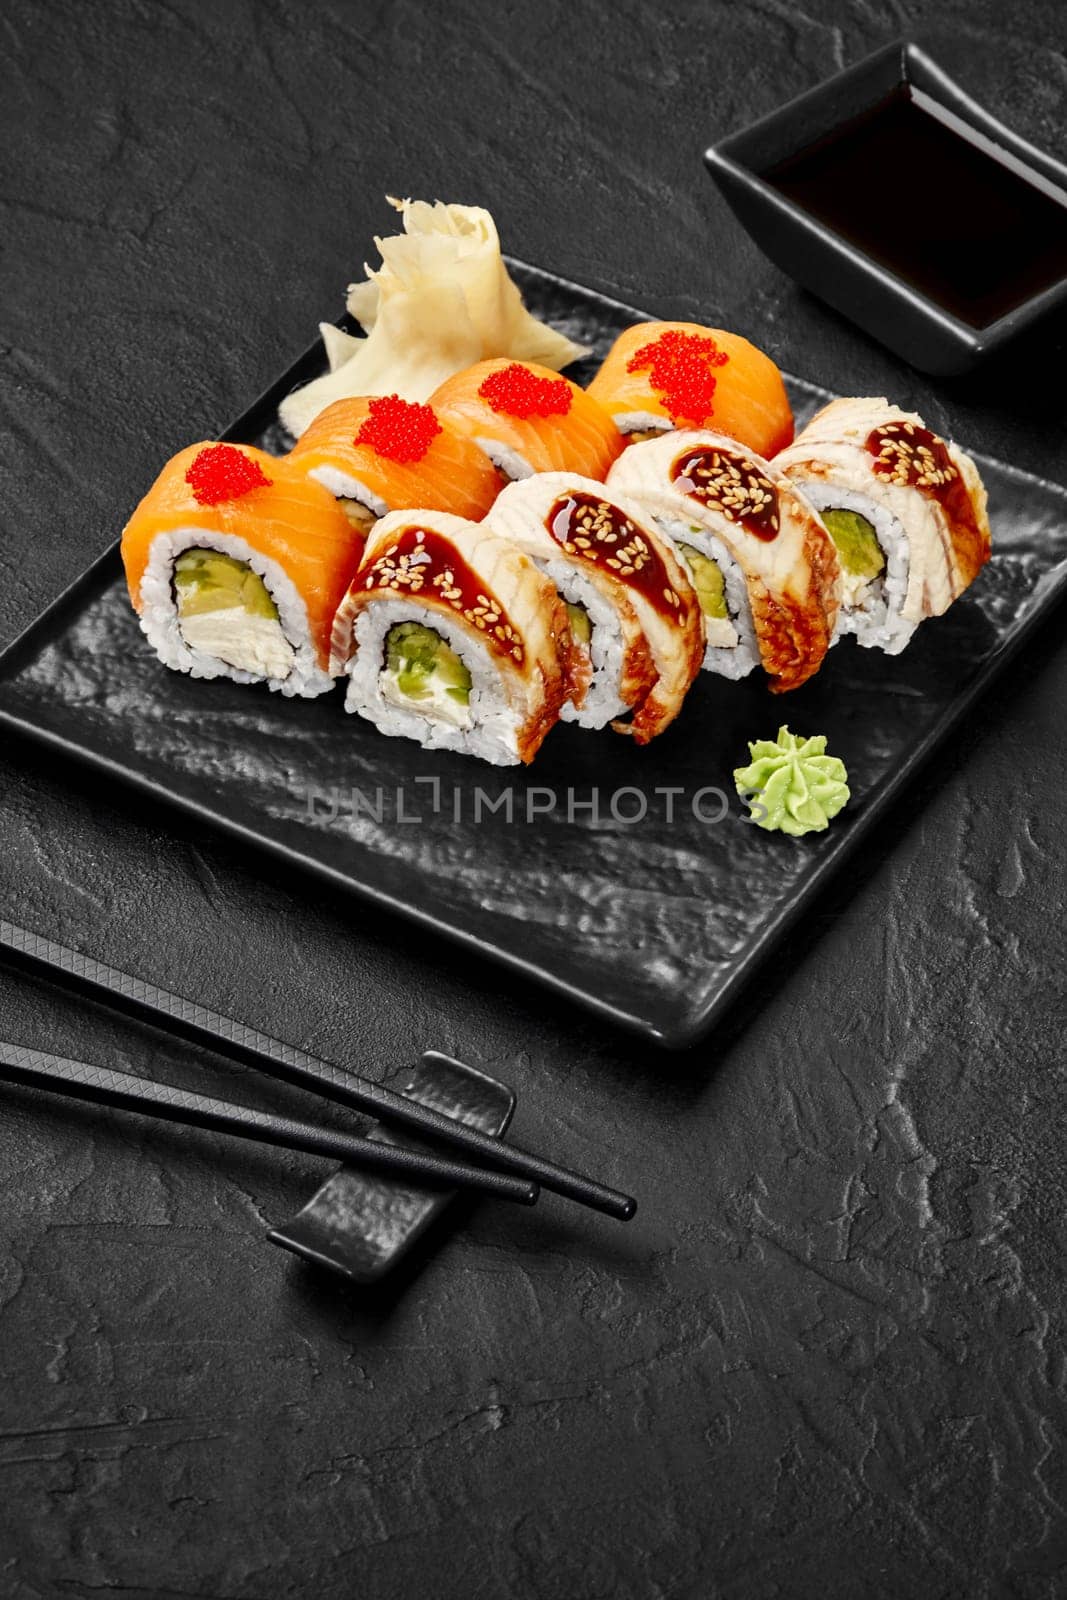 Classic Philadelphia rolls topped with salmon, tobiko, eel and sesame drizzled with unagi sauce traditionally served with wasabi, pickled ginger and soy sauce. Japanese cuisine